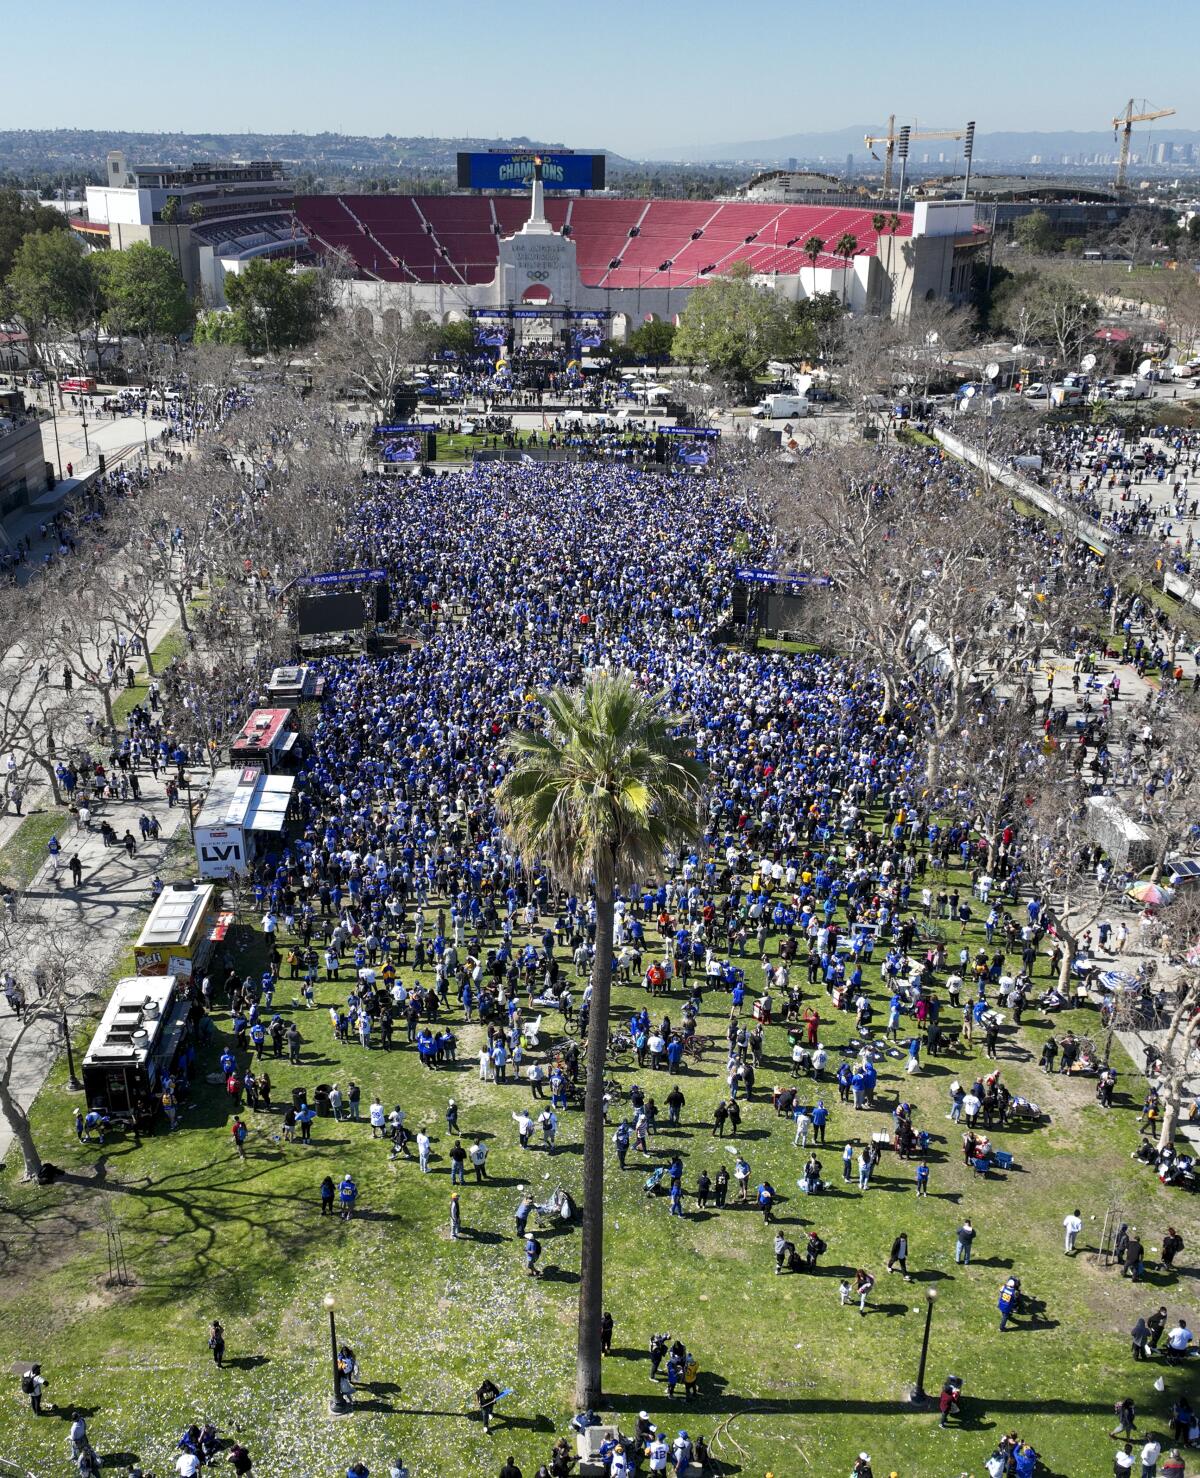 Aerial view of crowds celebrating the Rams' Super Bowl LVI championship parade and rally on Exposition Park at the Coliseum.